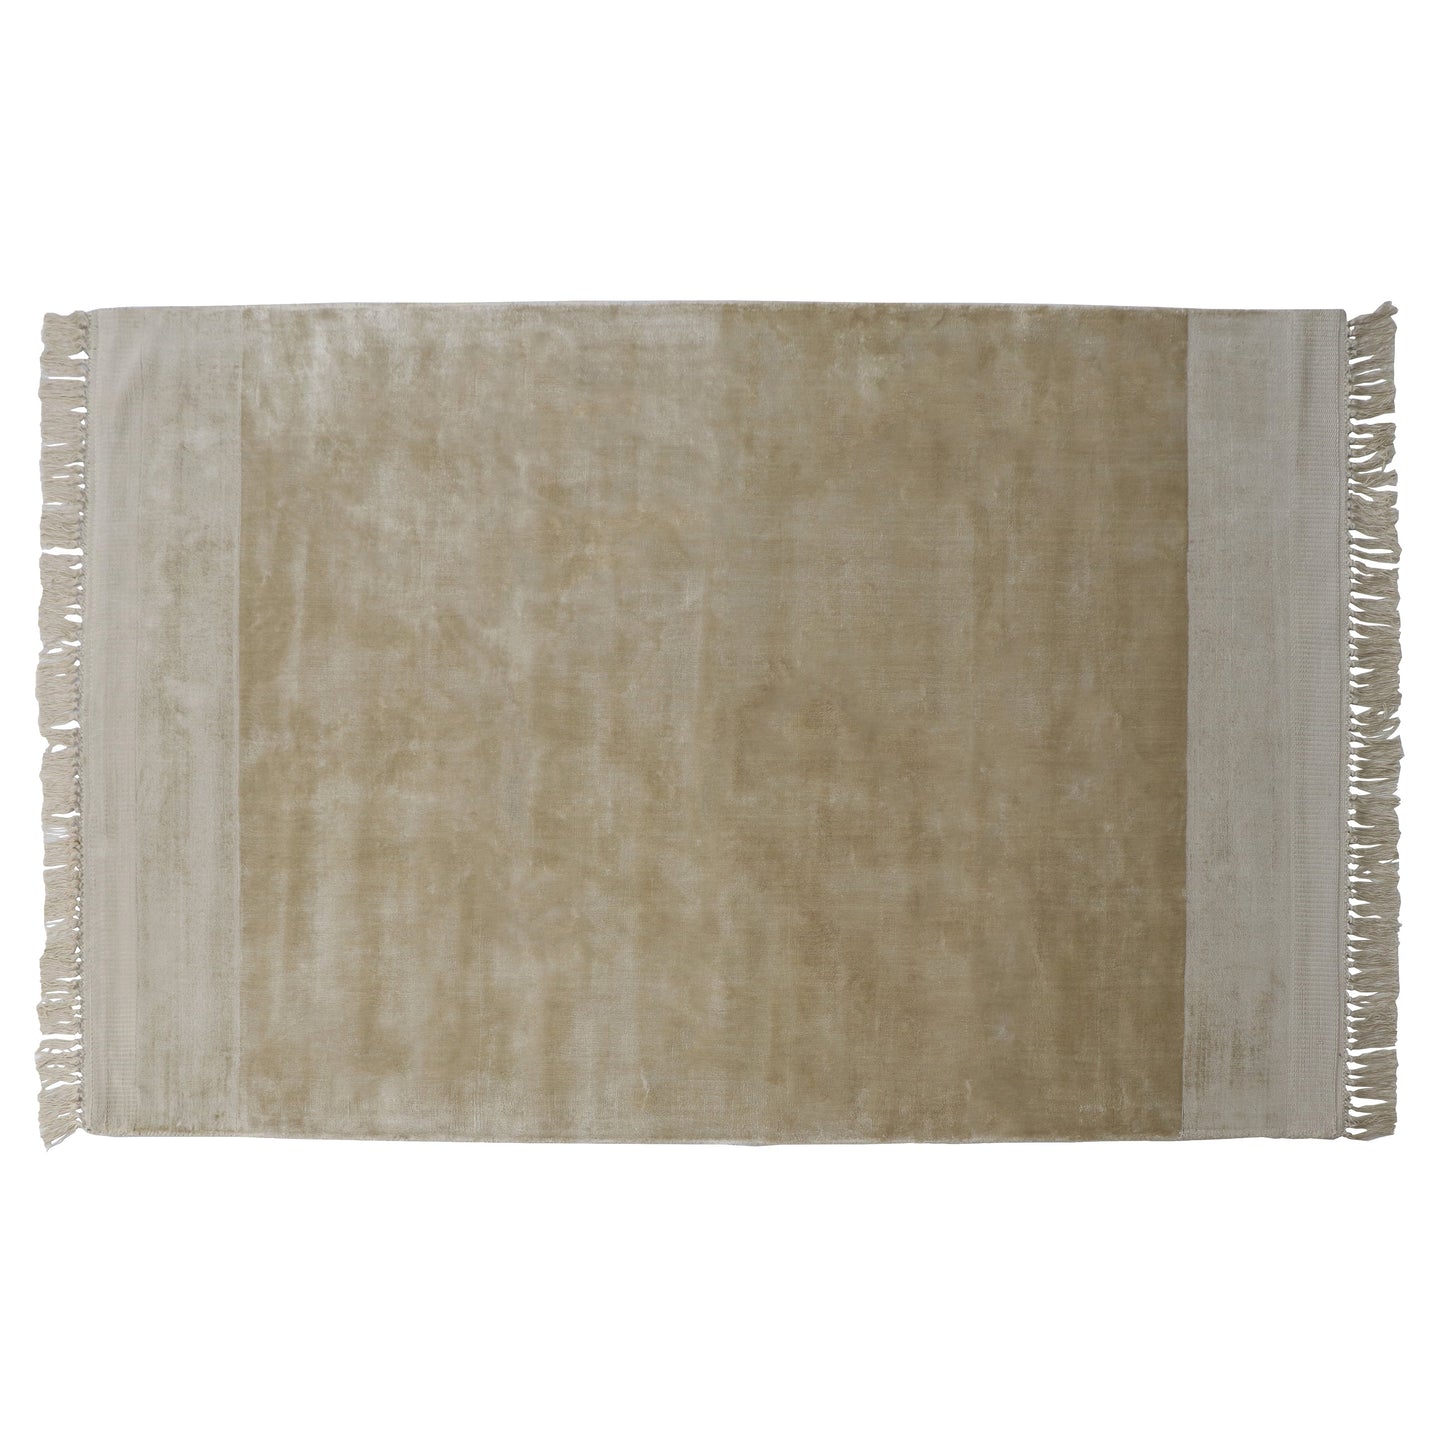 BEPUREHOME | Sweep - Teppich, Milch 170x240cm